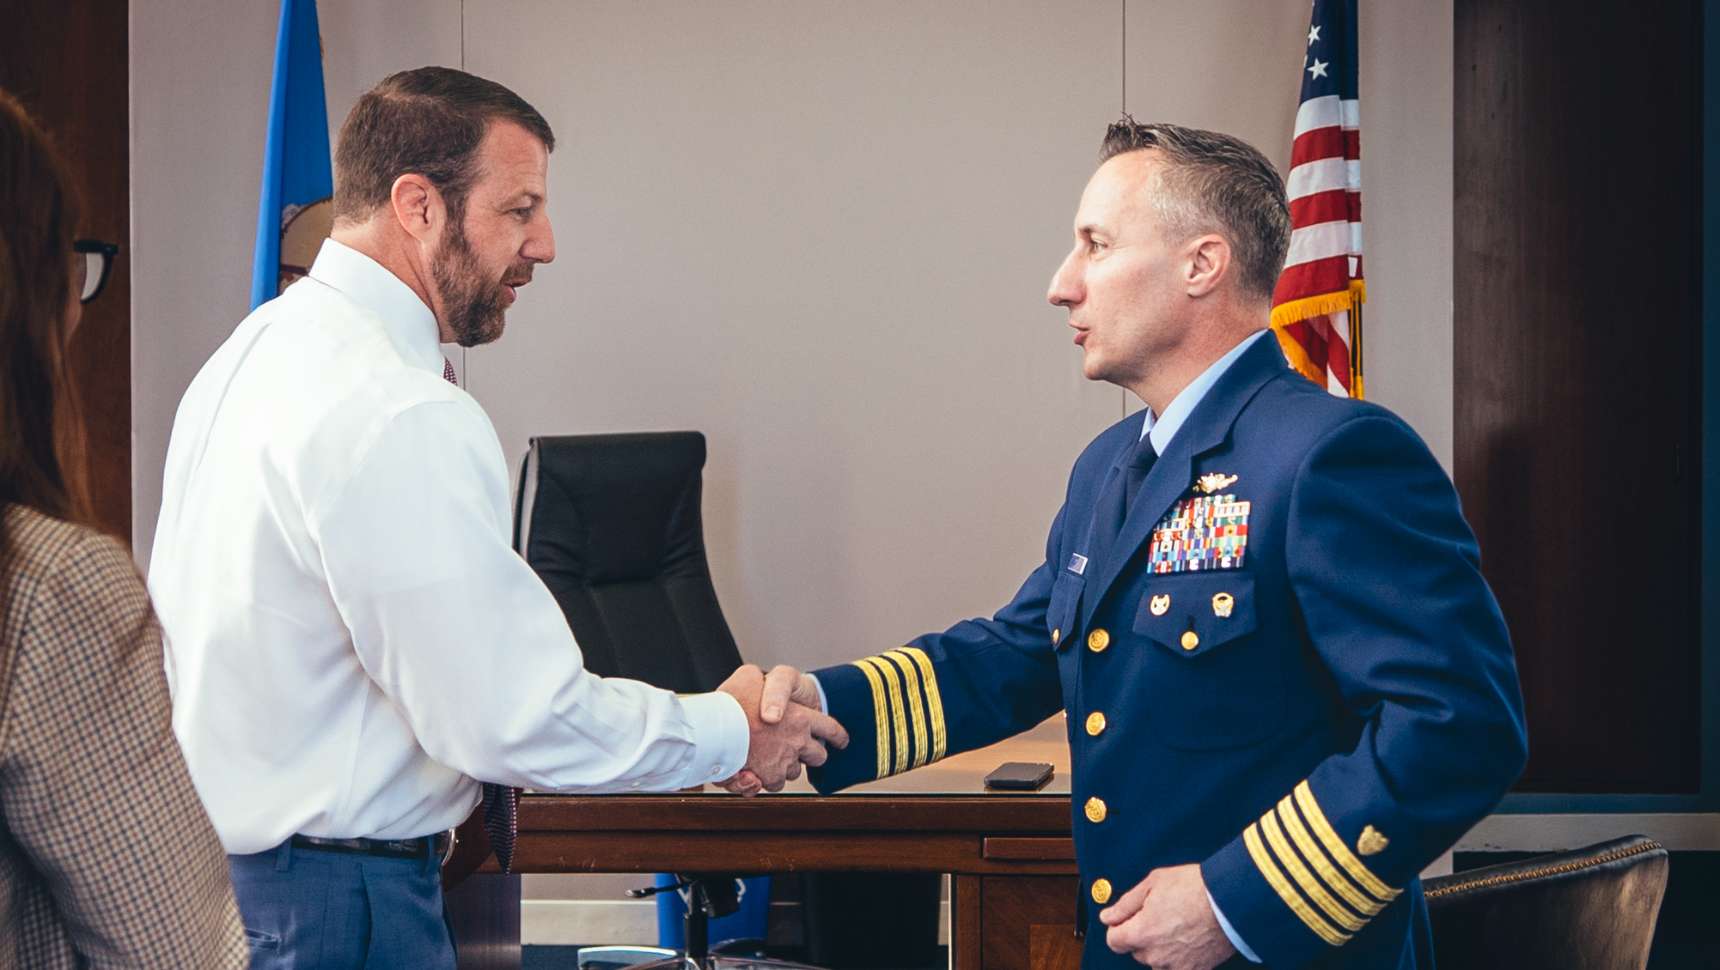 Senator Mullin shakes hands with military officer